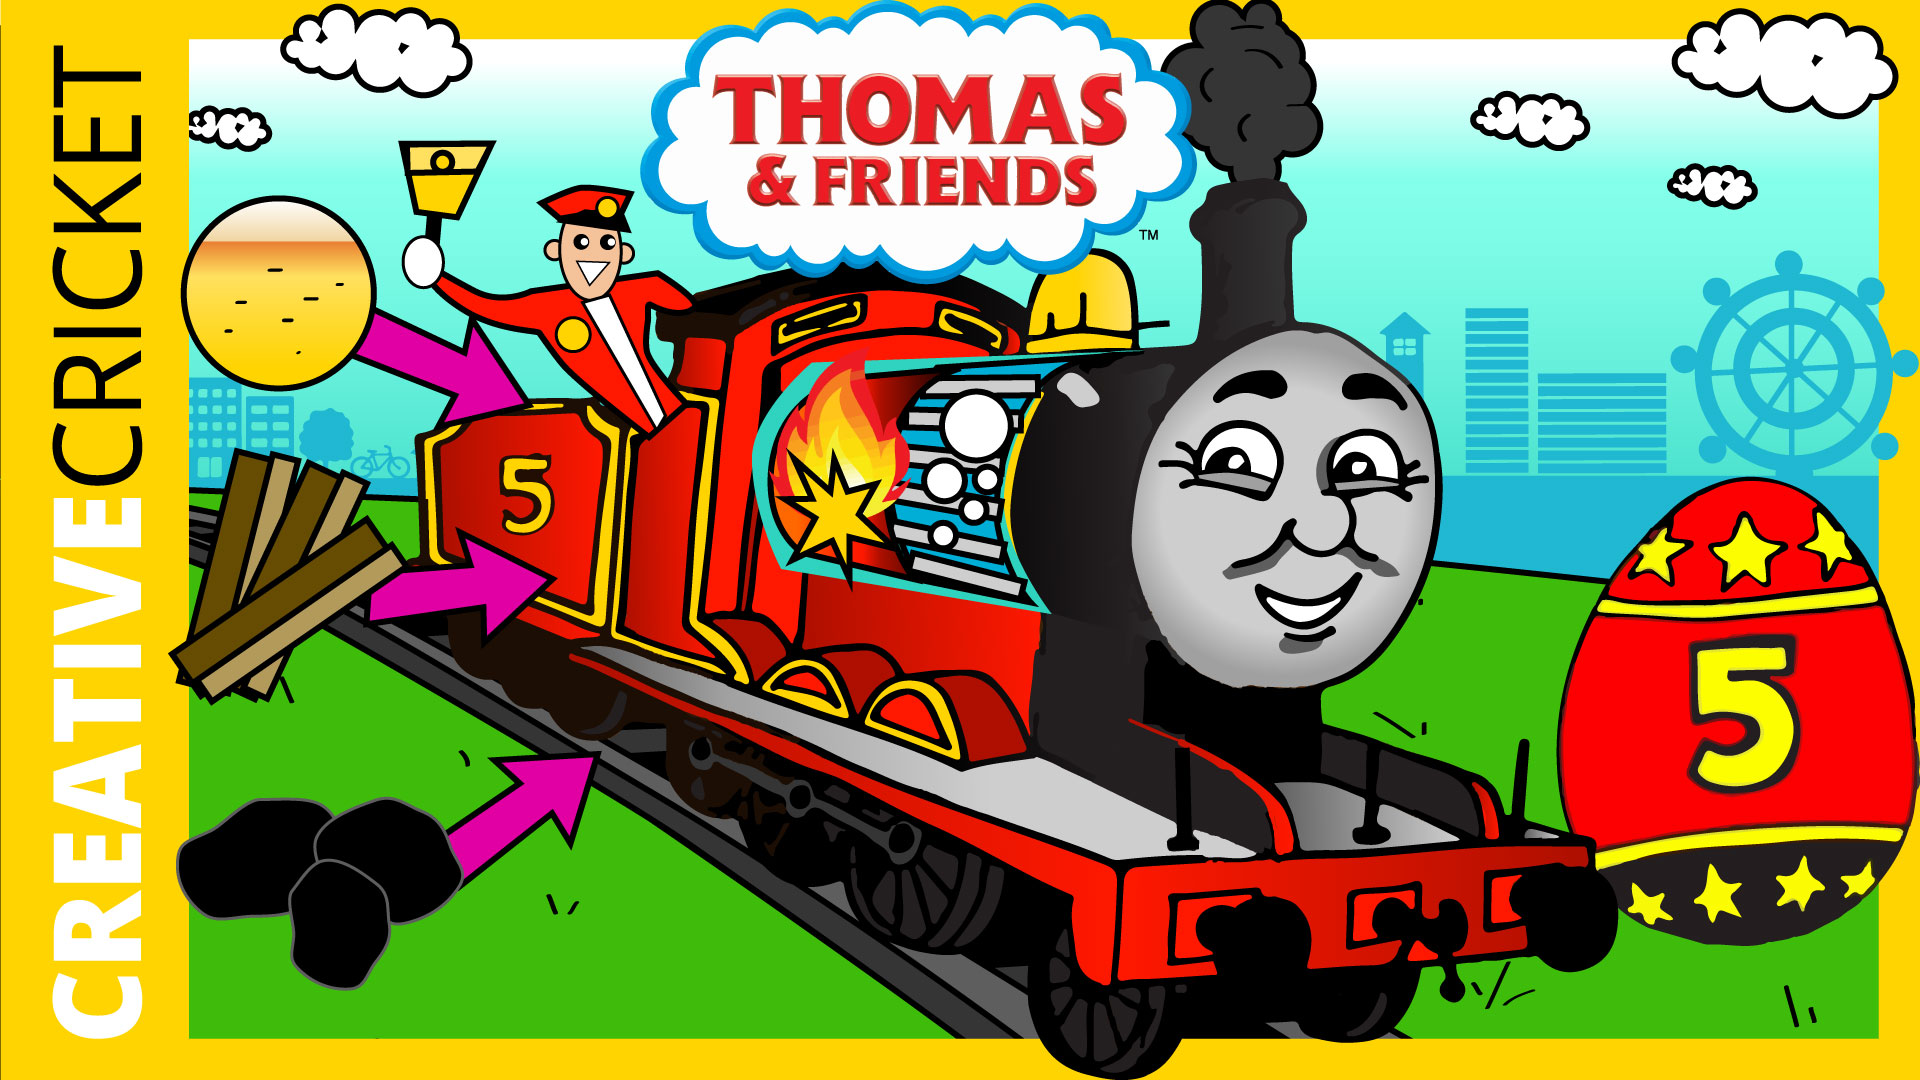 Jump to Thomas and Friends Adventures with James